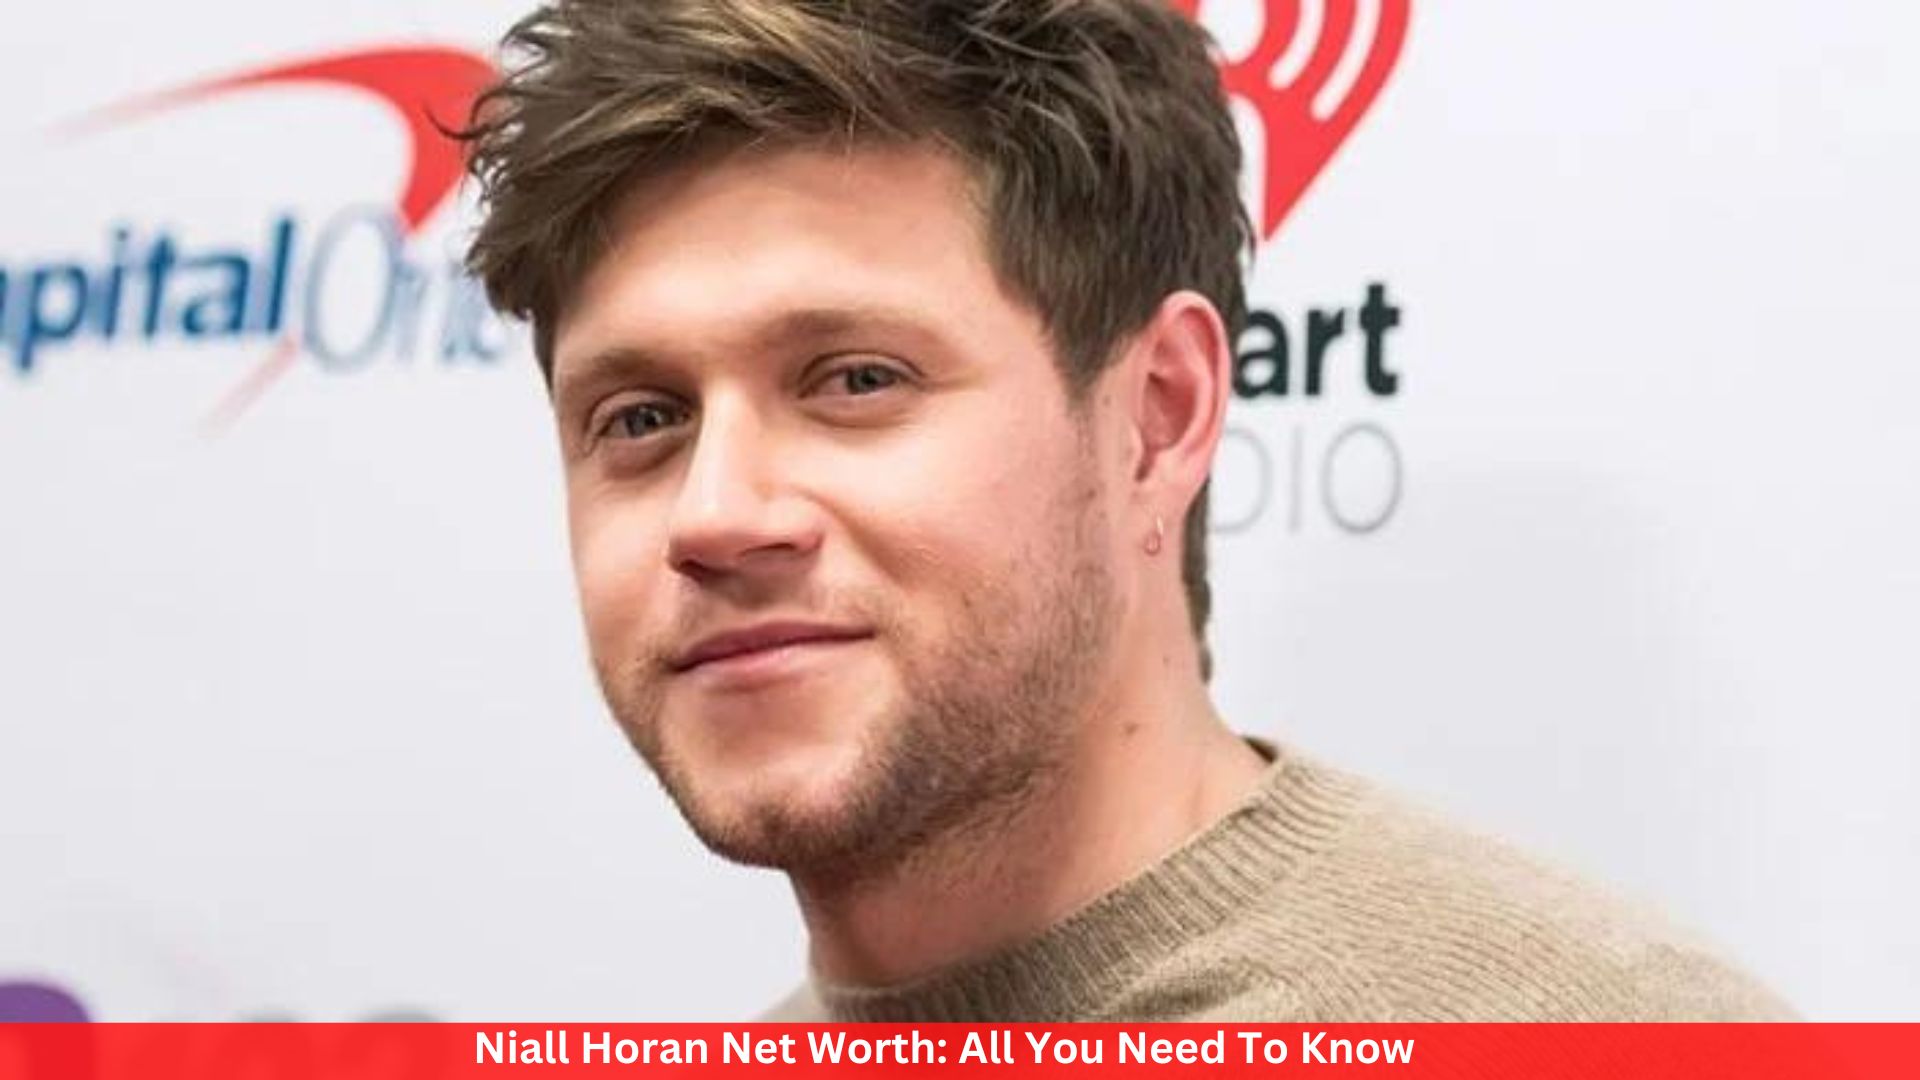 Niall Horan Net Worth: All You Need To Know